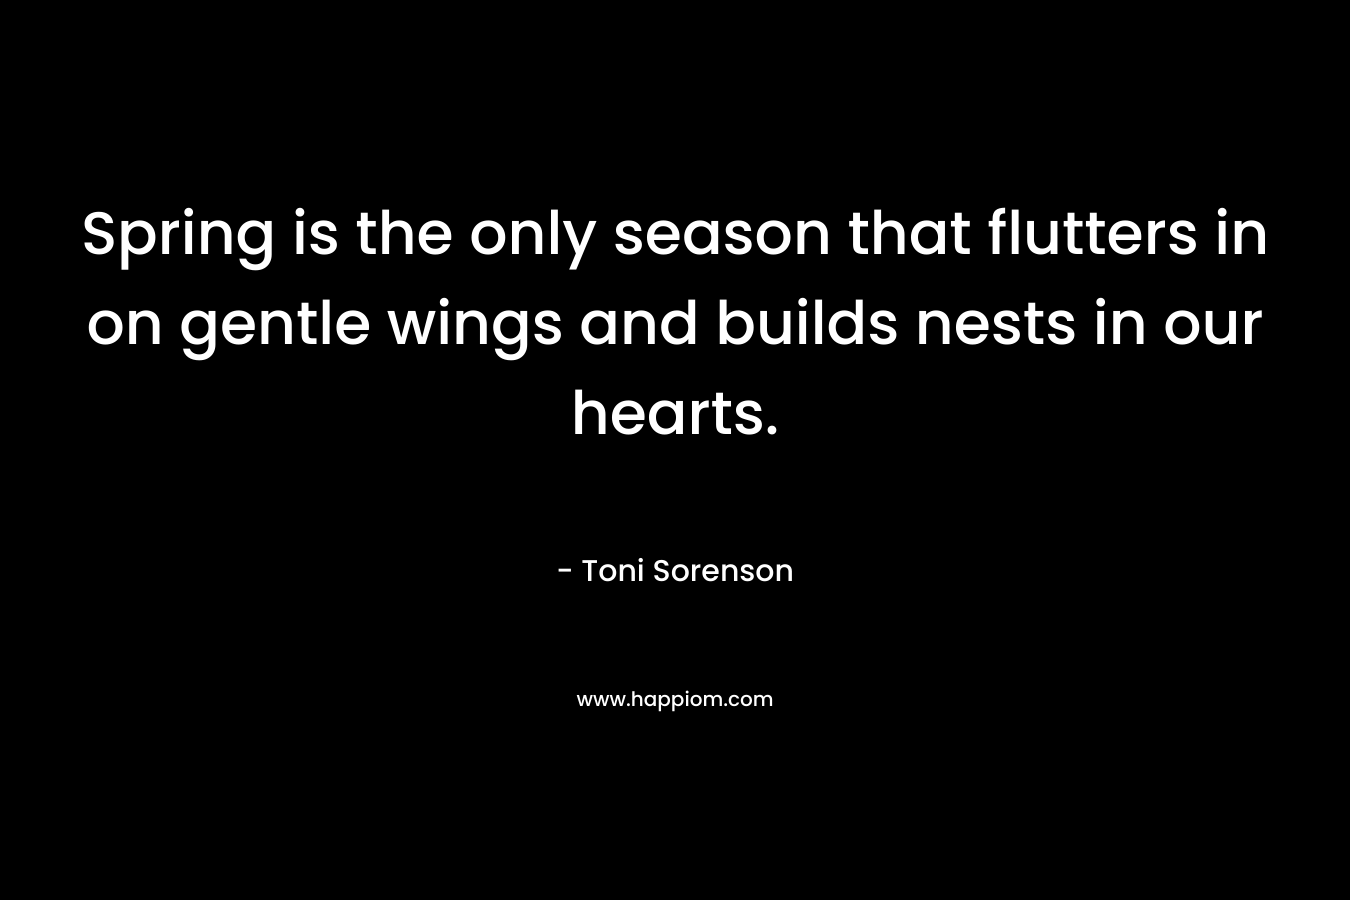 Spring is the only season that flutters in on gentle wings and builds nests in our hearts. – Toni Sorenson